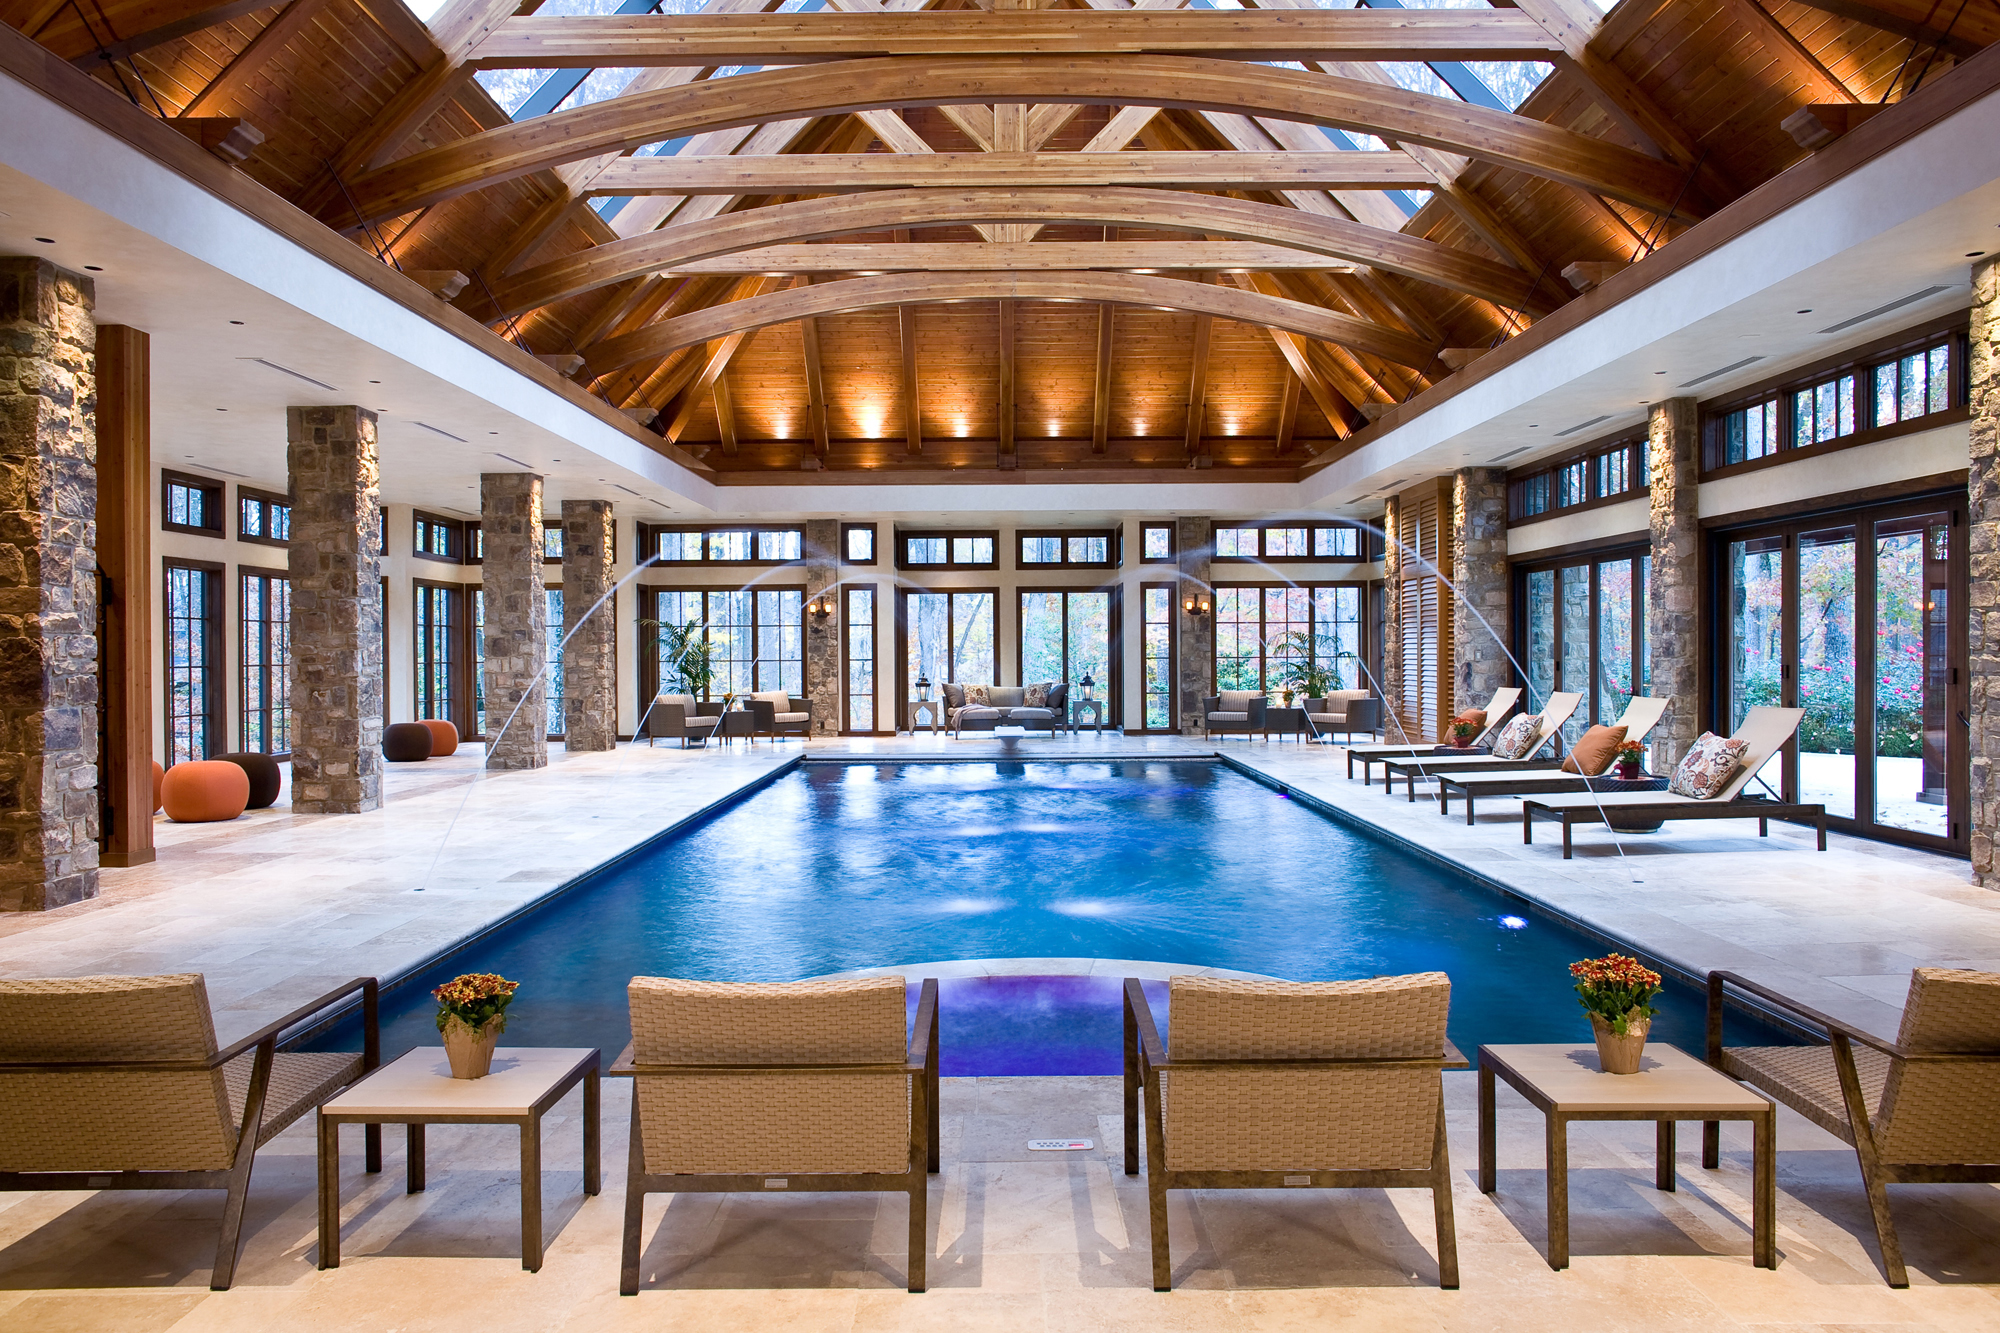 Indoor Pool and Great Room Addition in Potomac, MD | BOWA
